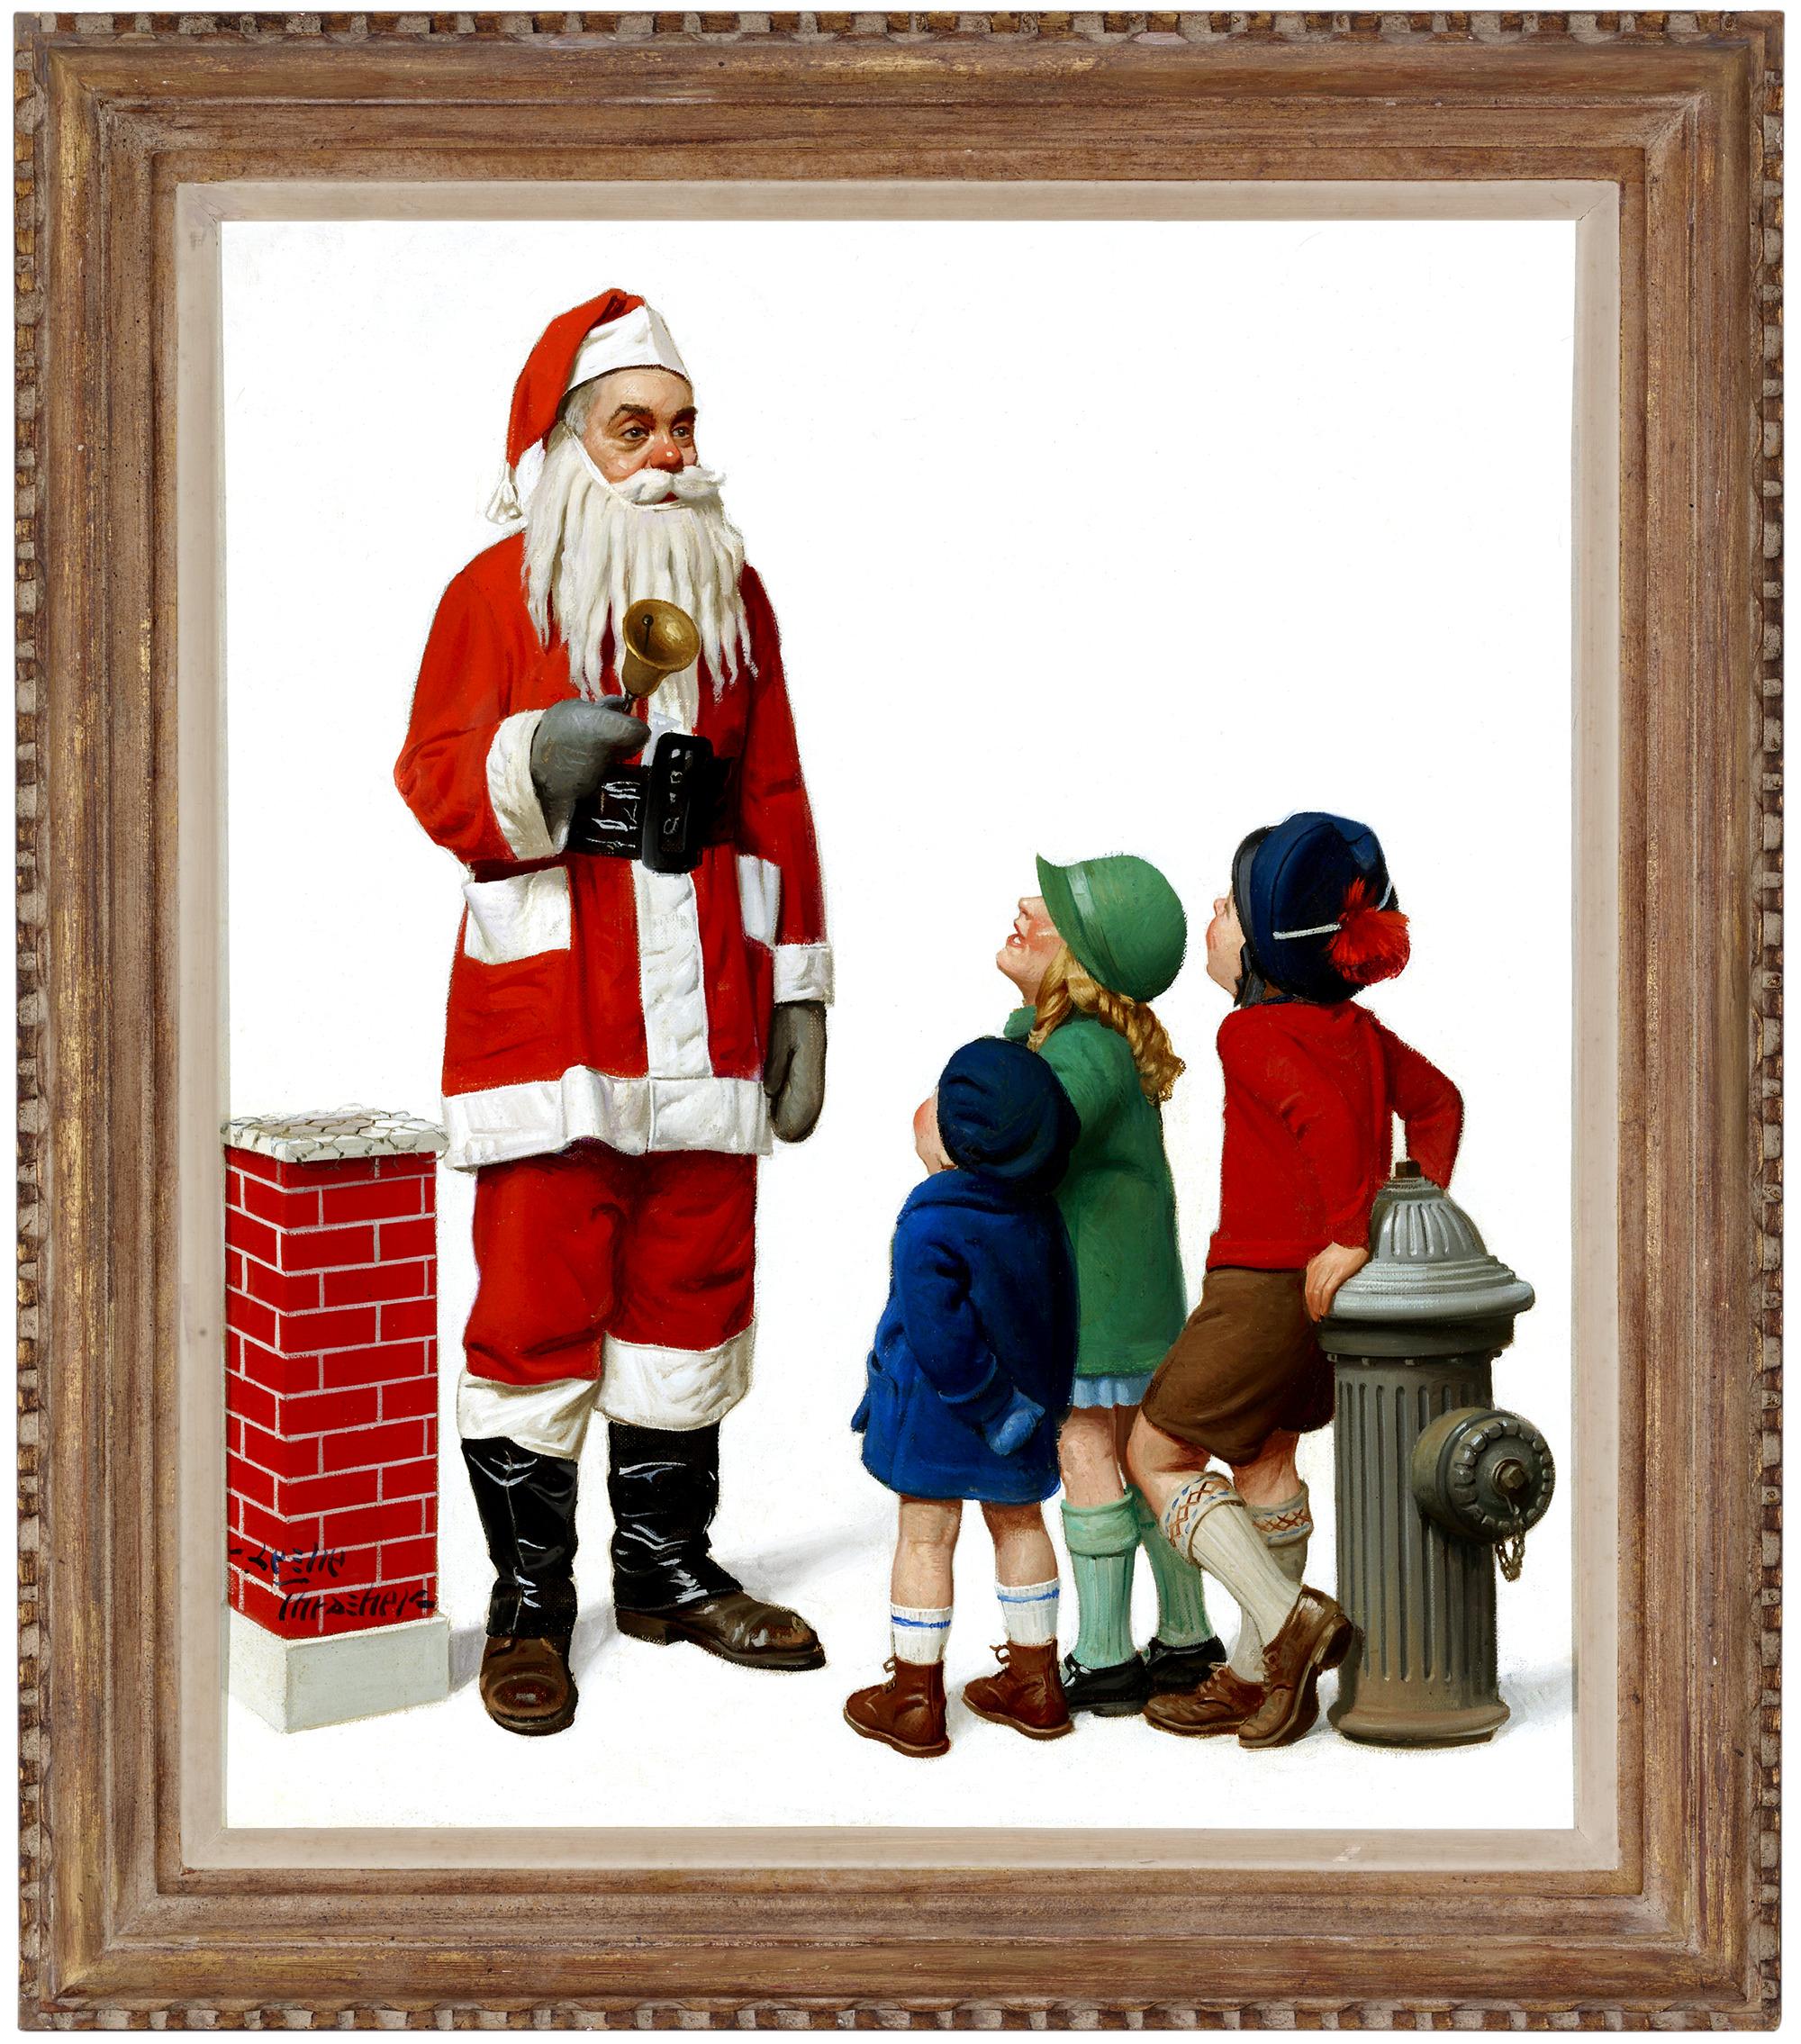 Santa - Other Art Style Painting by Leslie Thrasher